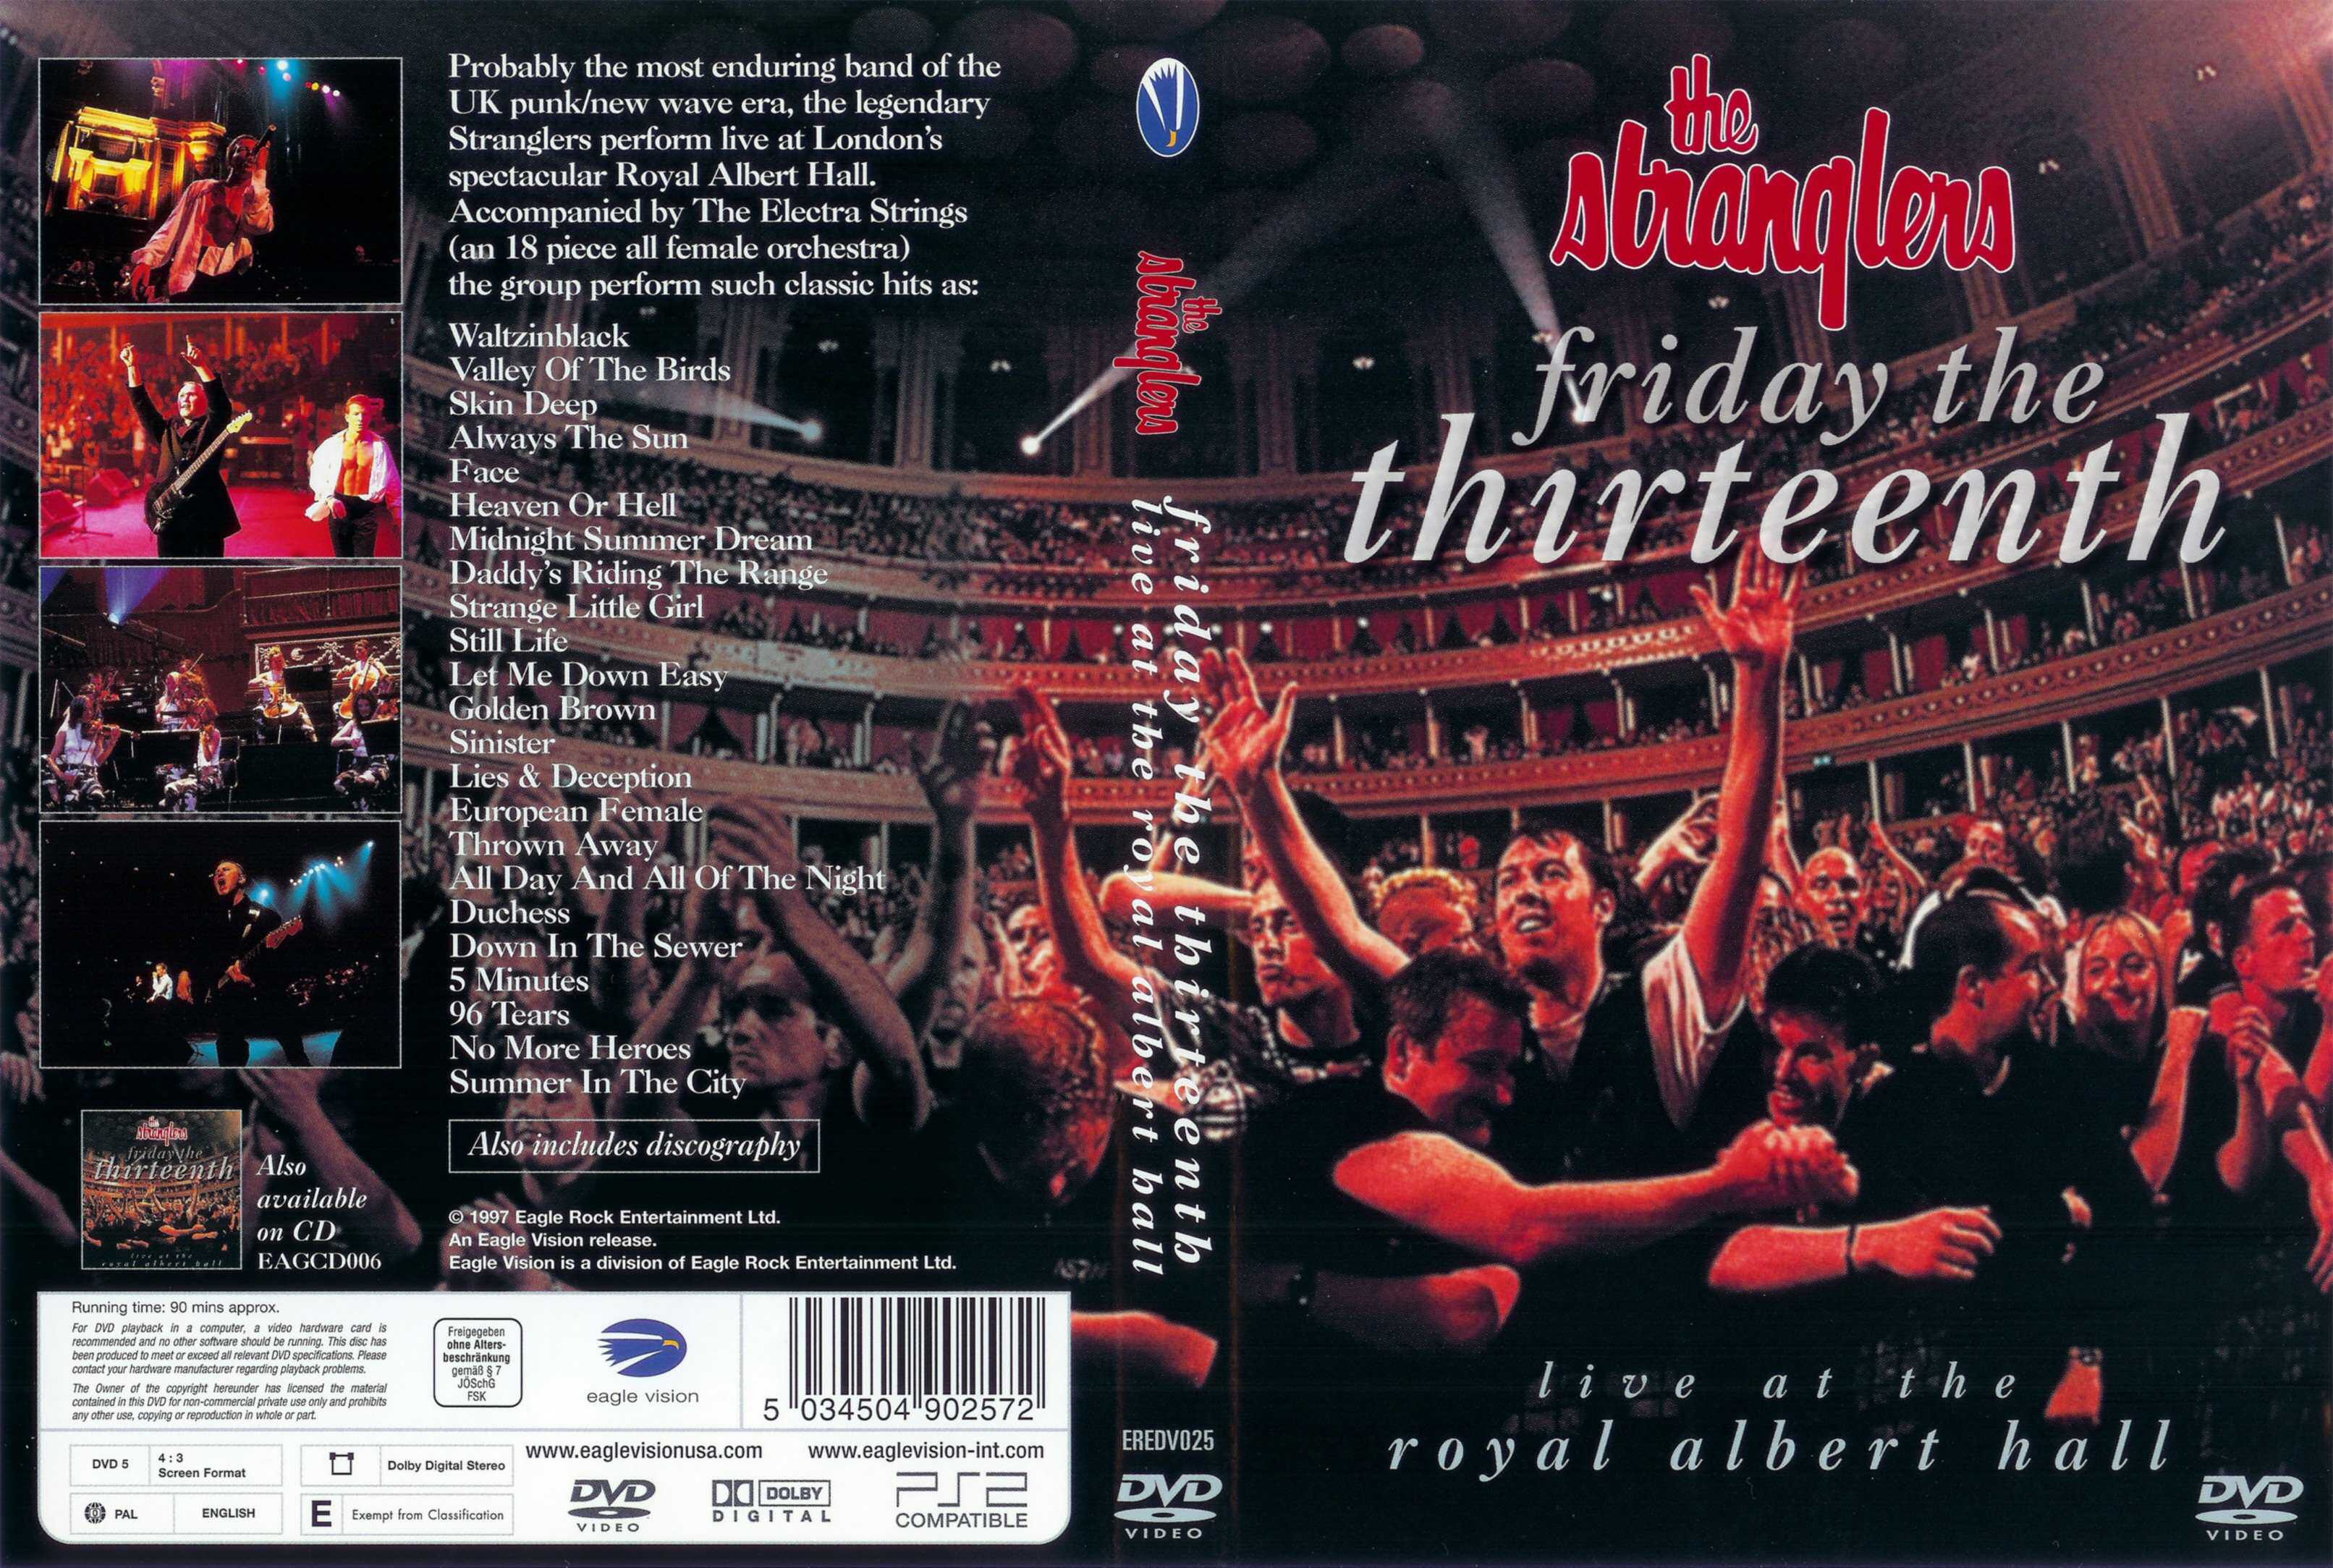 Jaquette DVD The stranglers friday the thirteenth